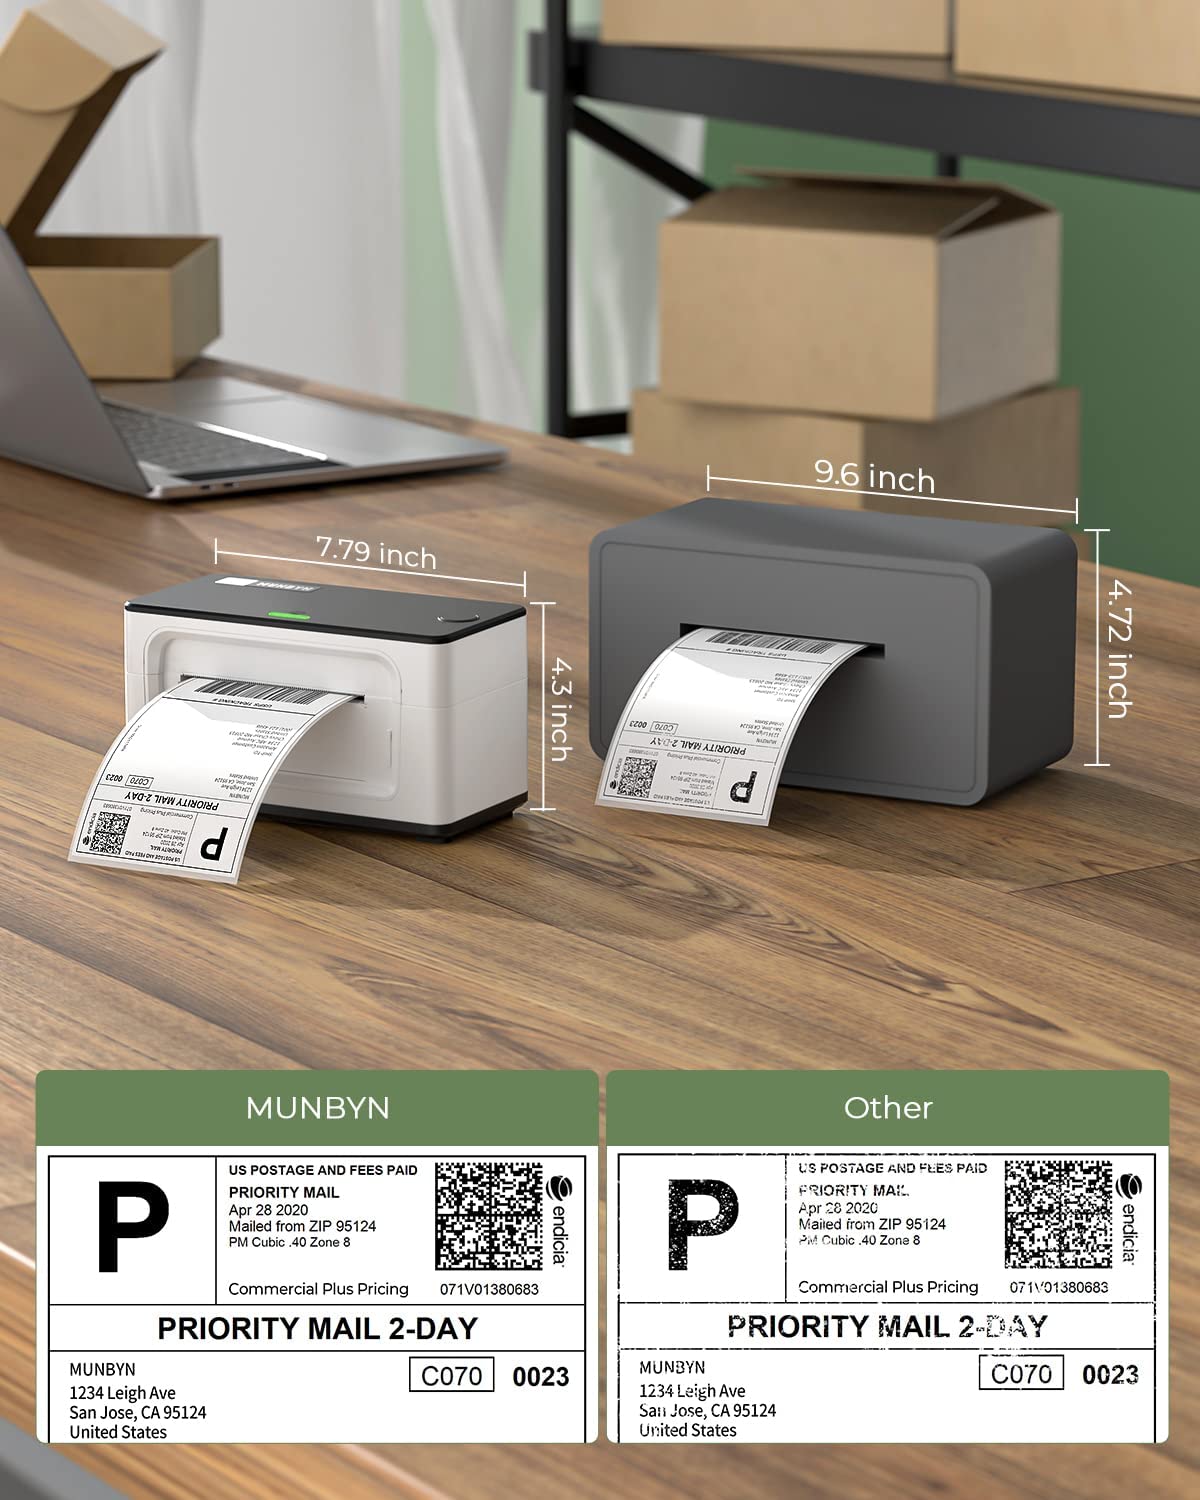 MUNBYN P941 compact shipping label printer has a high resolution than other thermal label printer.